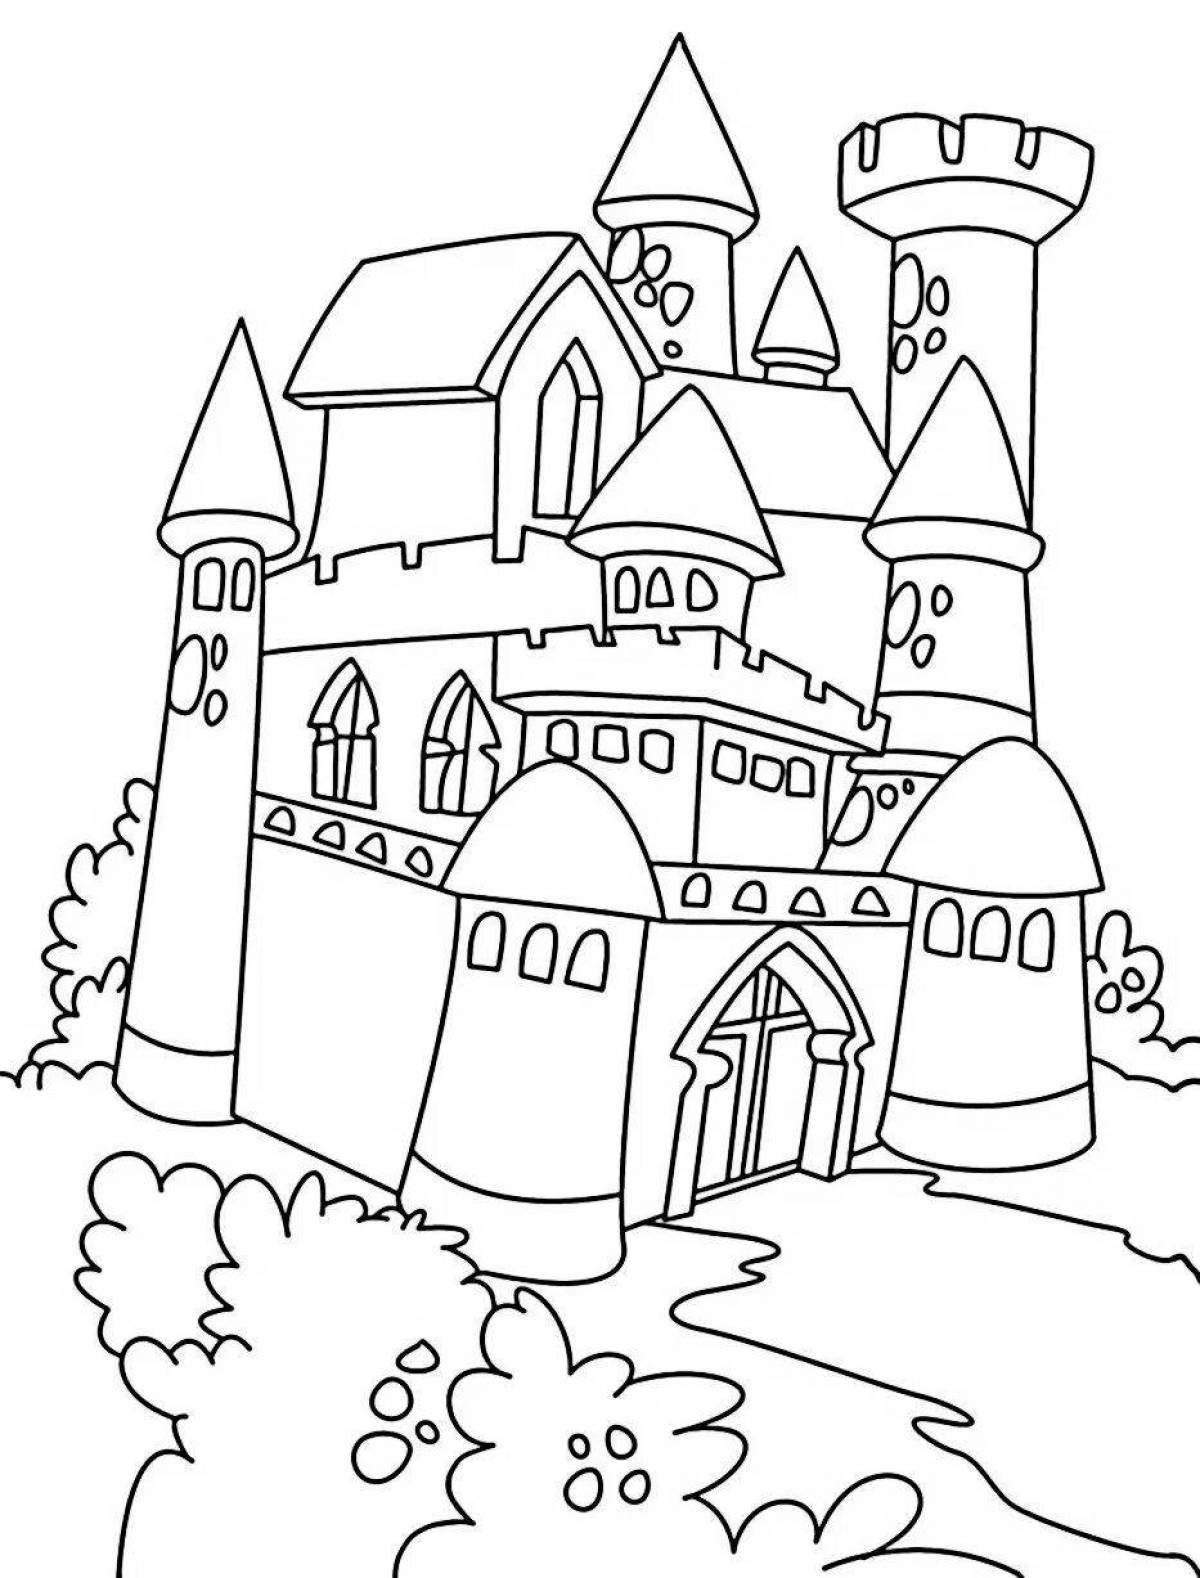 Exotic castle coloring book for children 4-5 years old